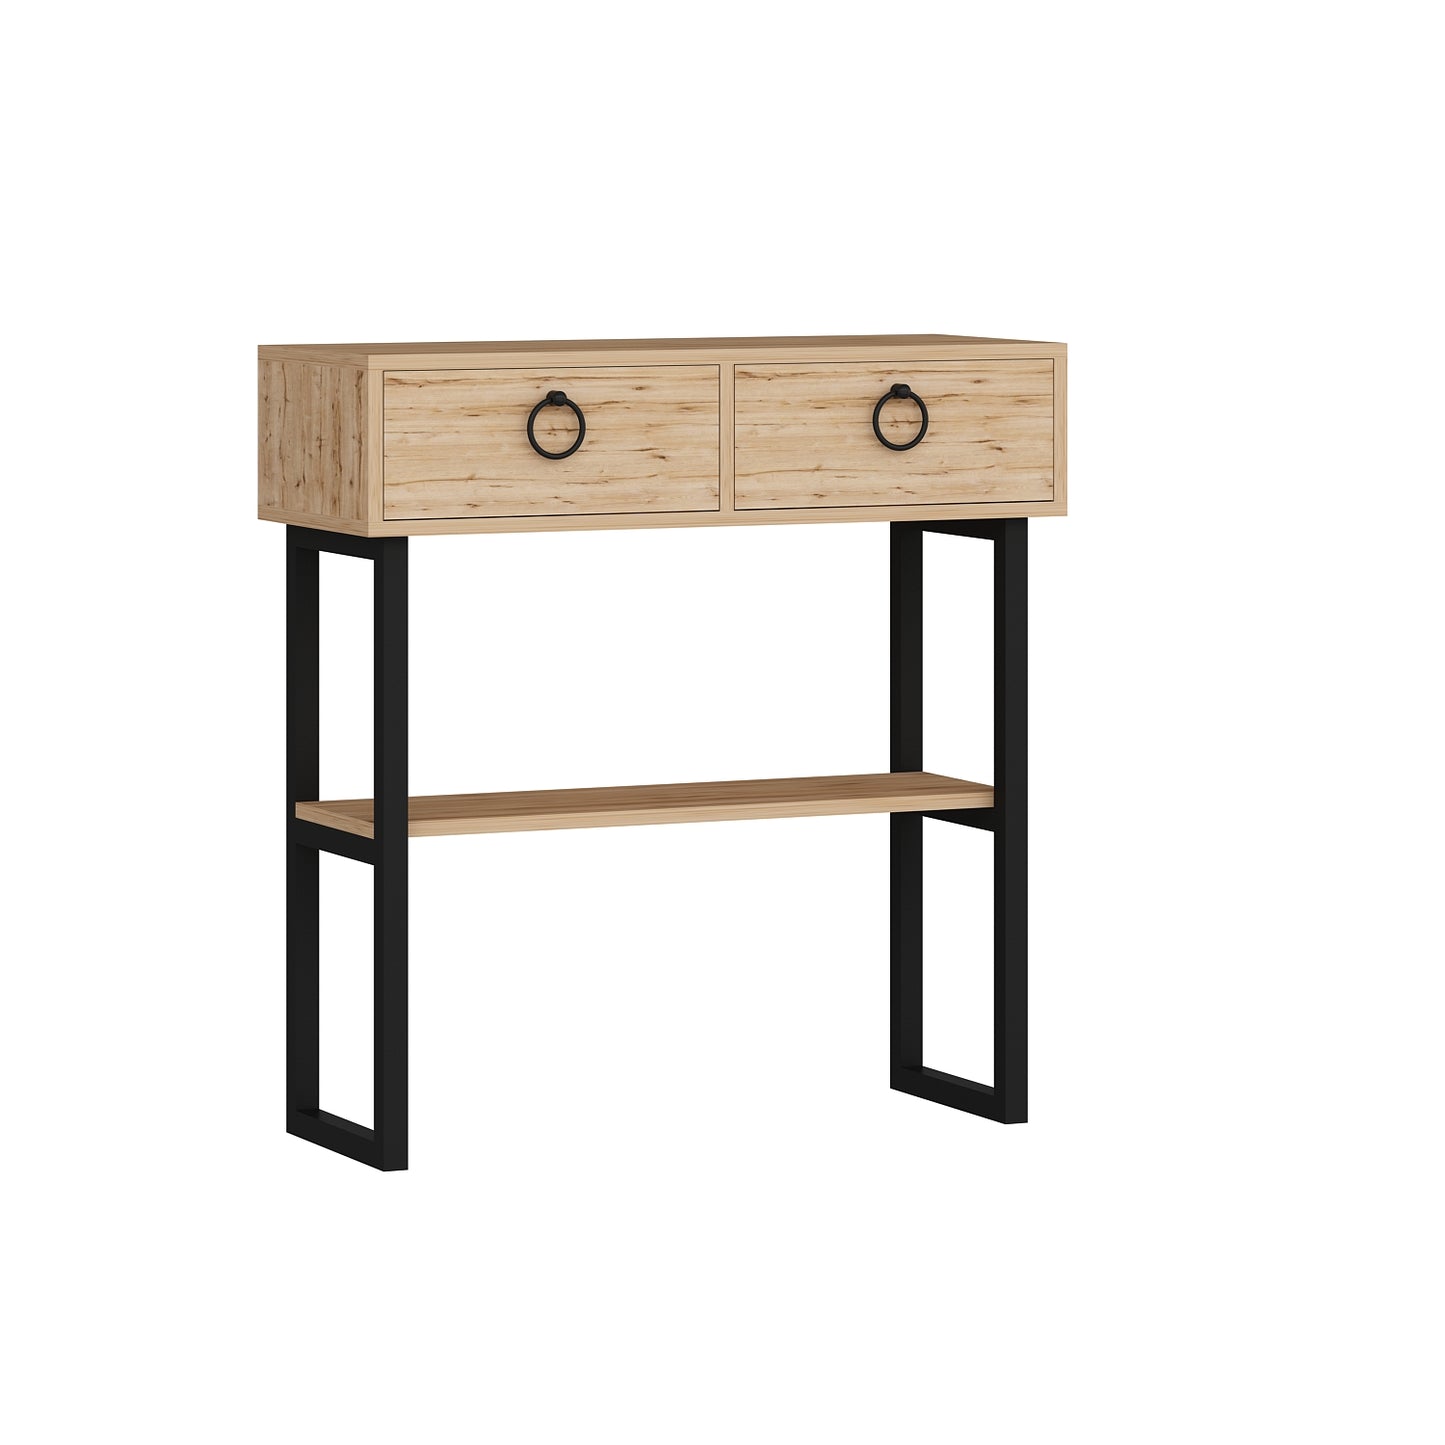 Stein Metal Manufacture Wood Dresuar Console Table with Drawers and Shelf